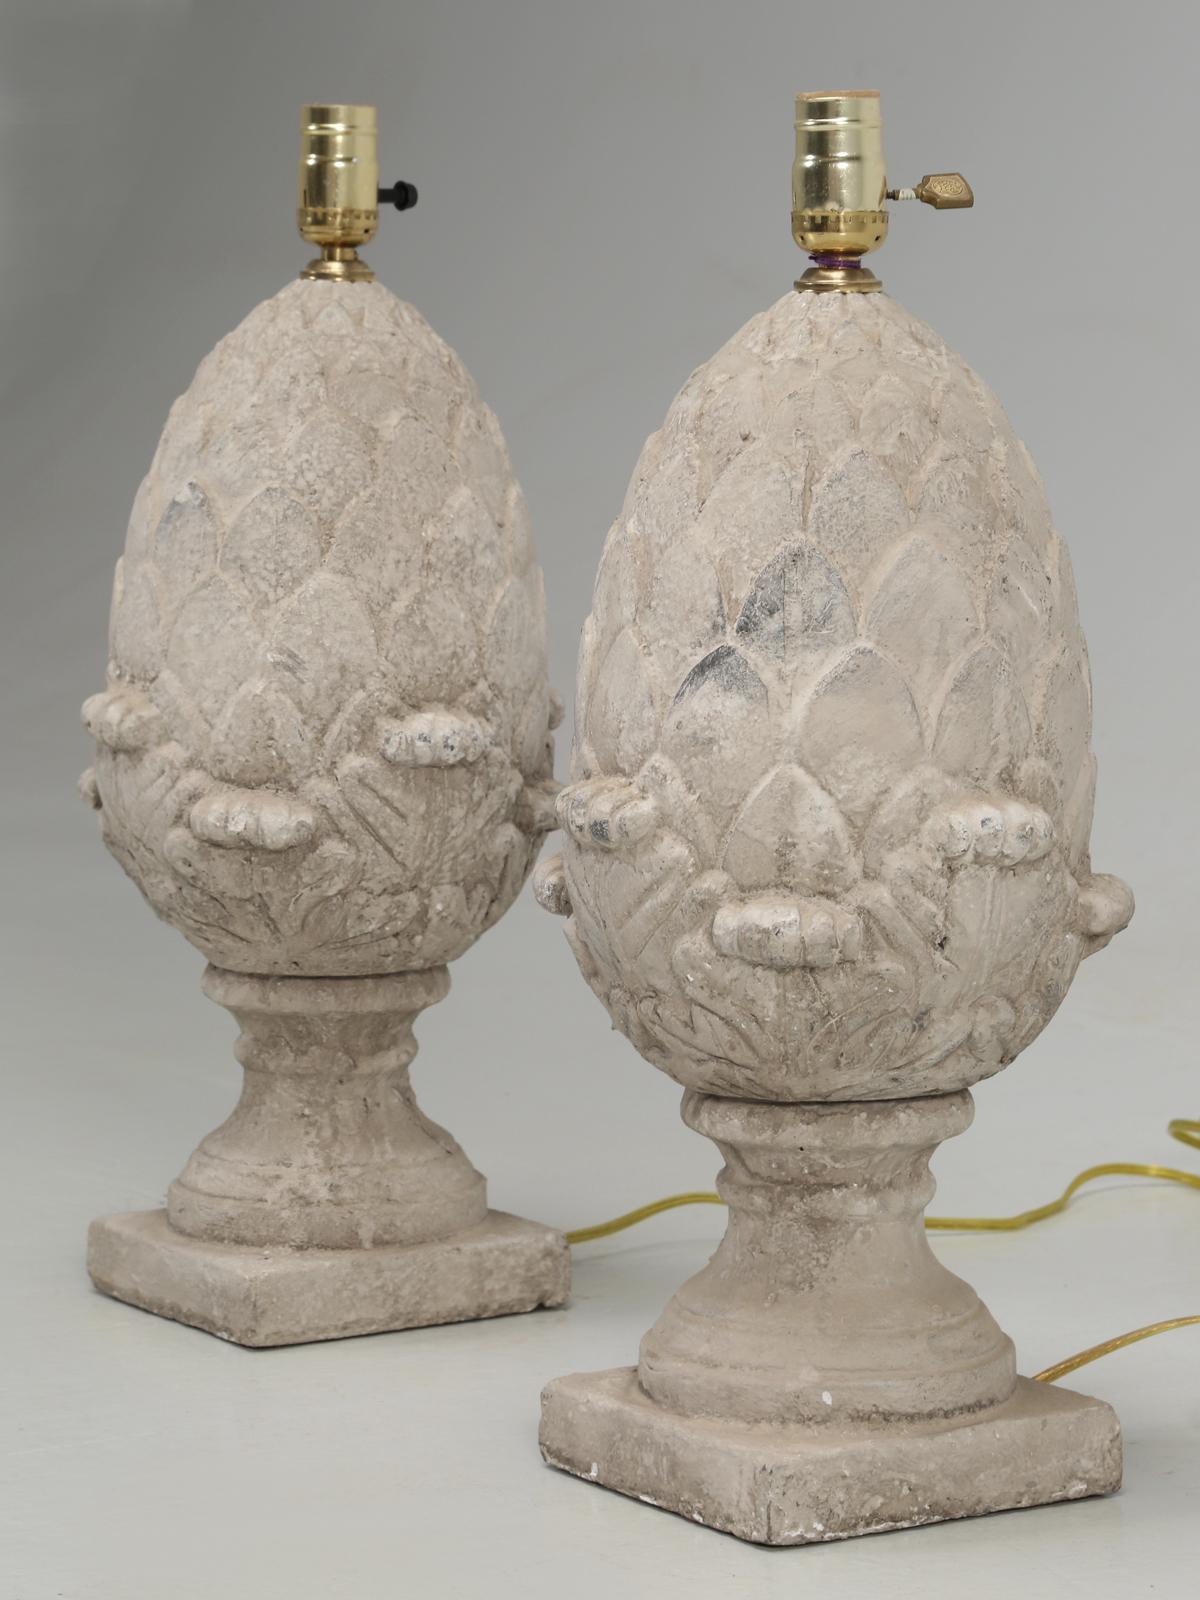 Pair of lamps done in a faux stone appearance, in the shape of an artichoke. Our in-house electrical department, has converted the pair of lamps to USA standards.
Height was measured at the top of the socket.